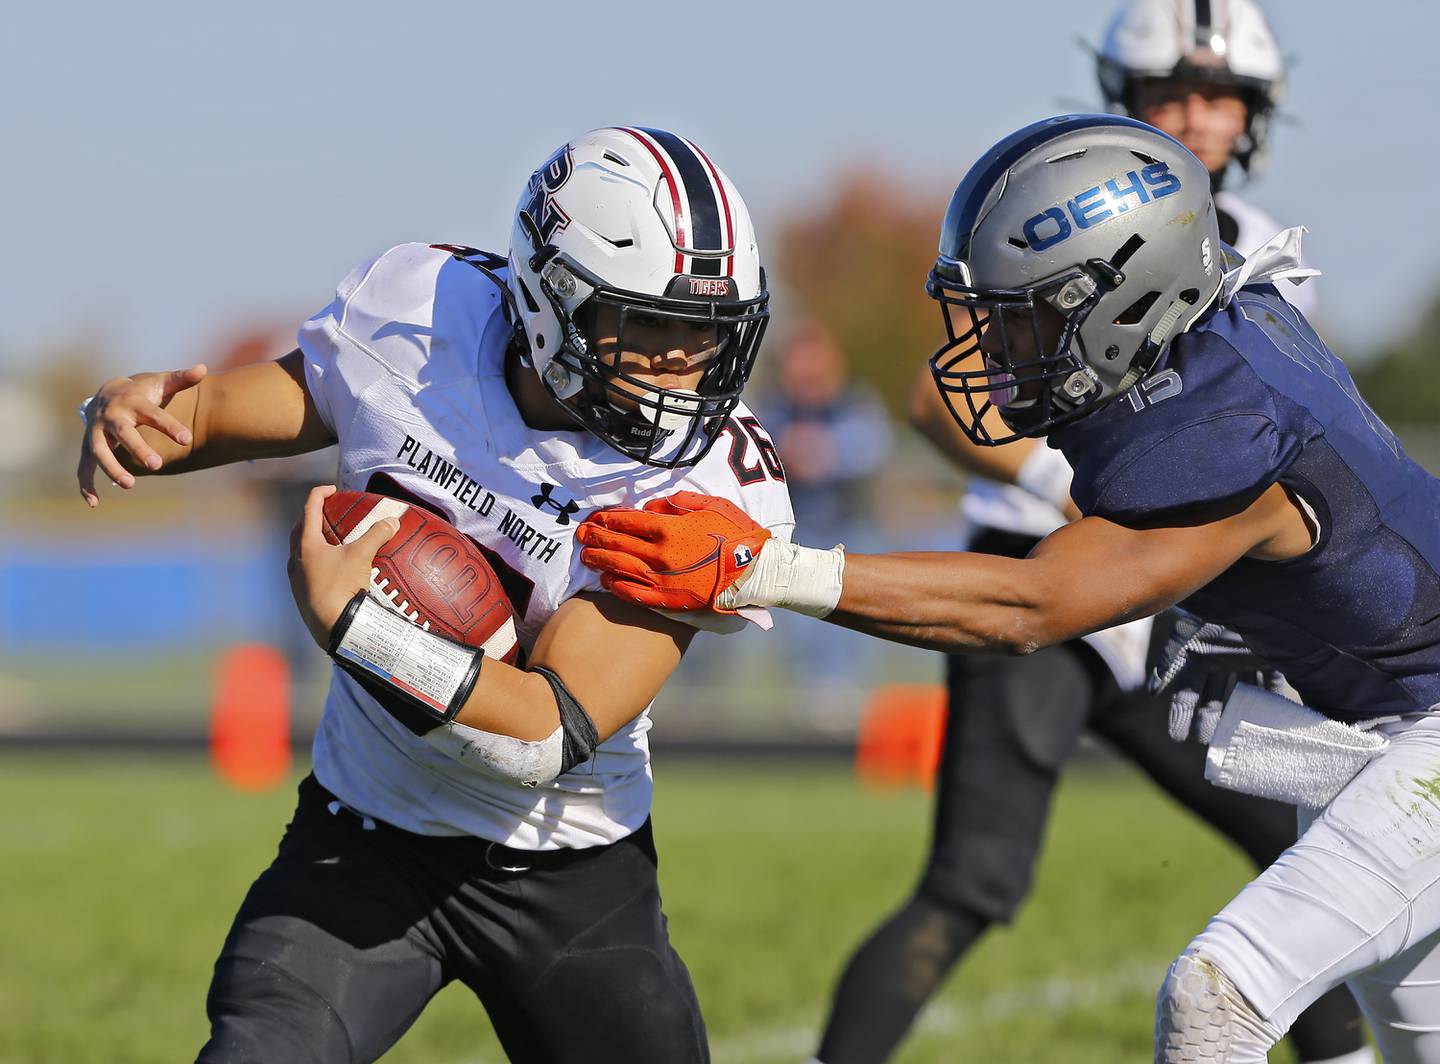 Plainfield North's Jared Gumila runs the ball during the varsity football game between Plainfield North and Oswego East on Saturday, October 23, 2021 at Oswego East high school in Oswego, IL.